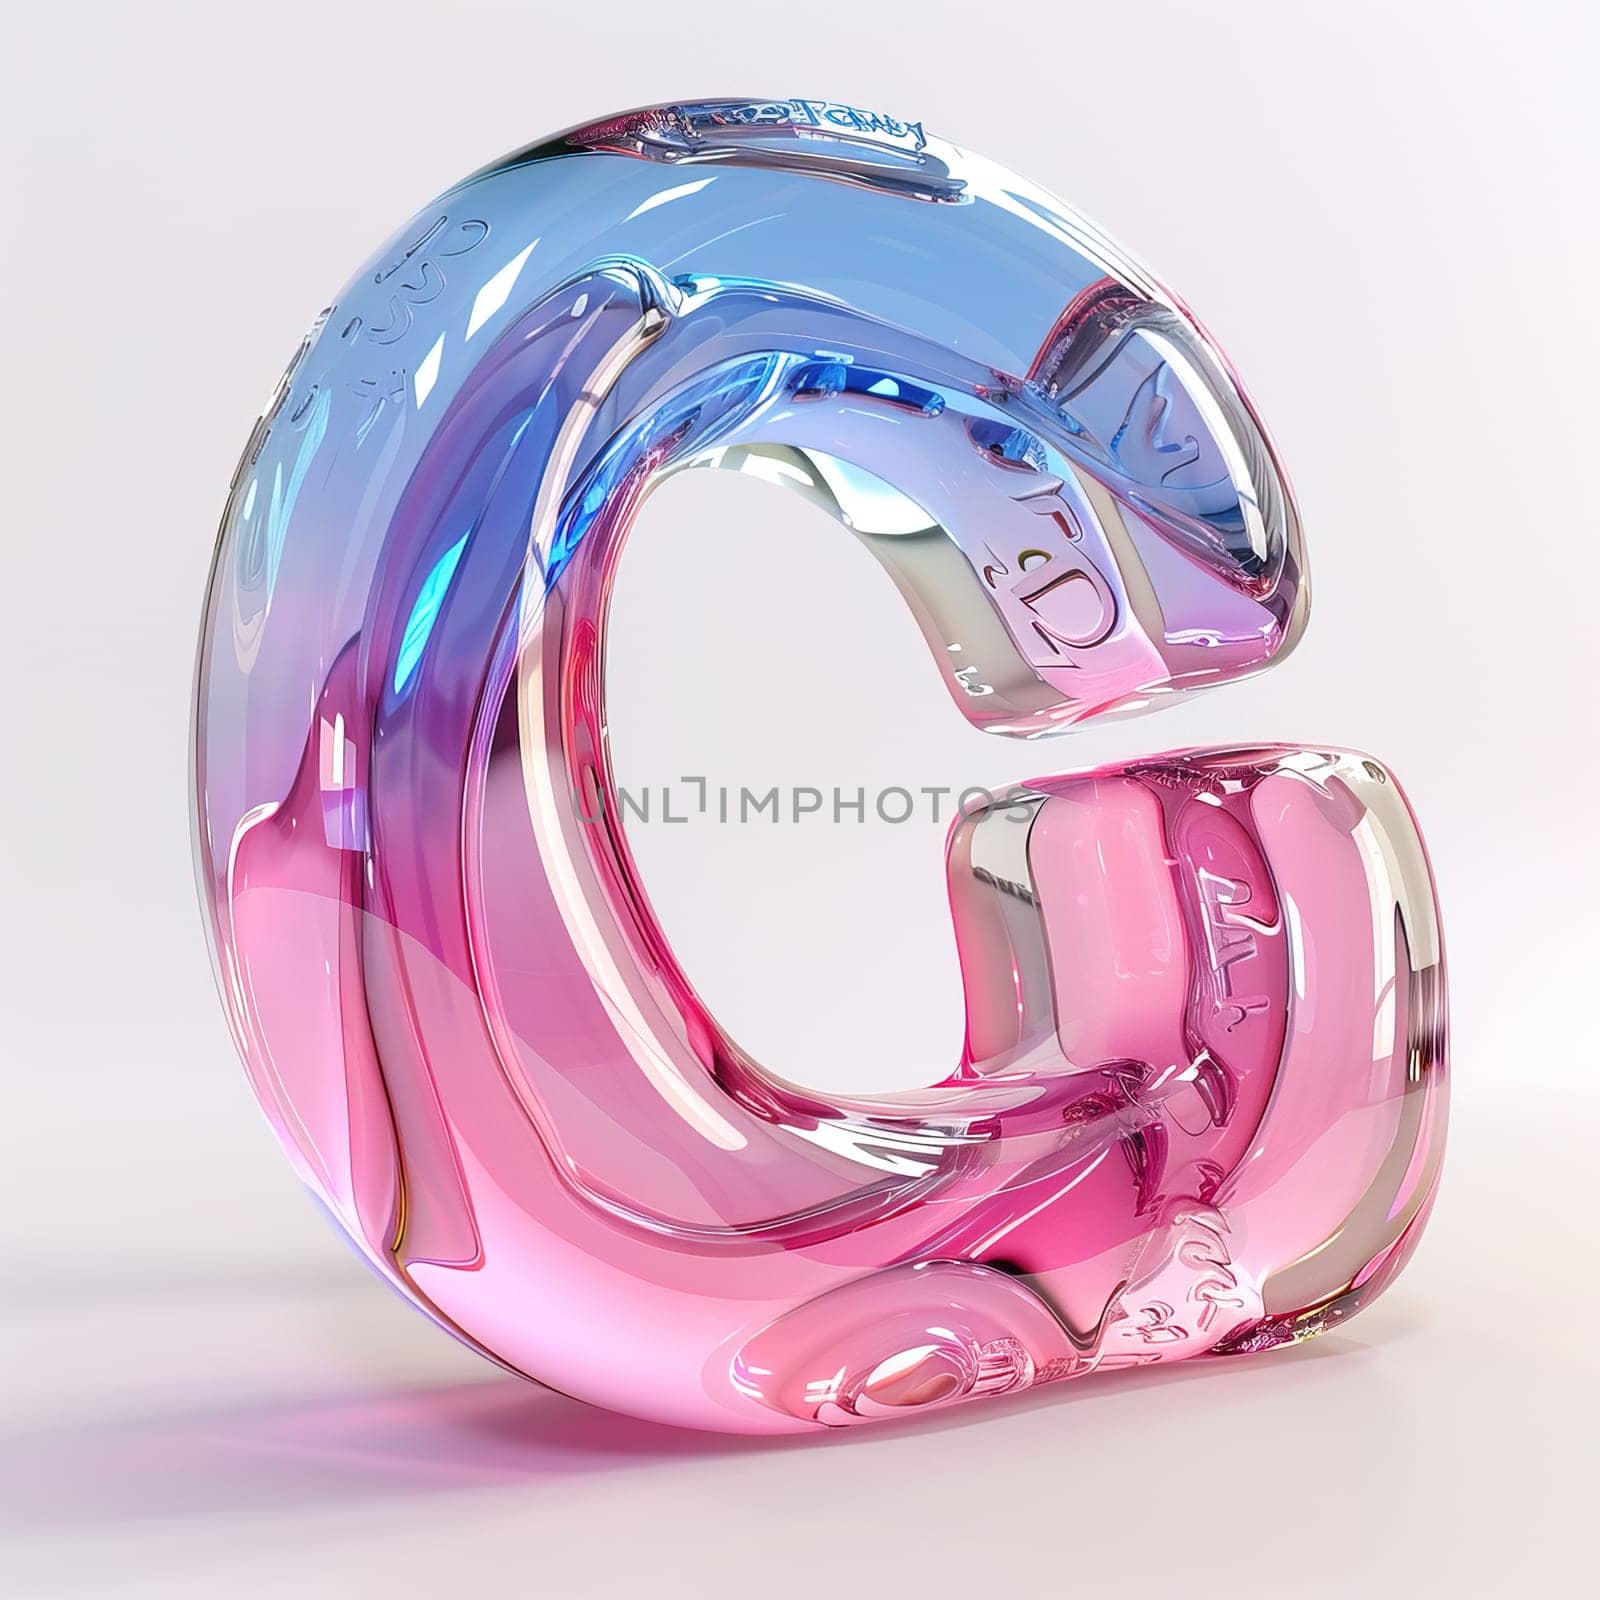 glassy pink and blue letter "G" for logo in the style of neumorphism, soft natural lighting simple and elegant space, close-up, super high detaill by mr-tigga